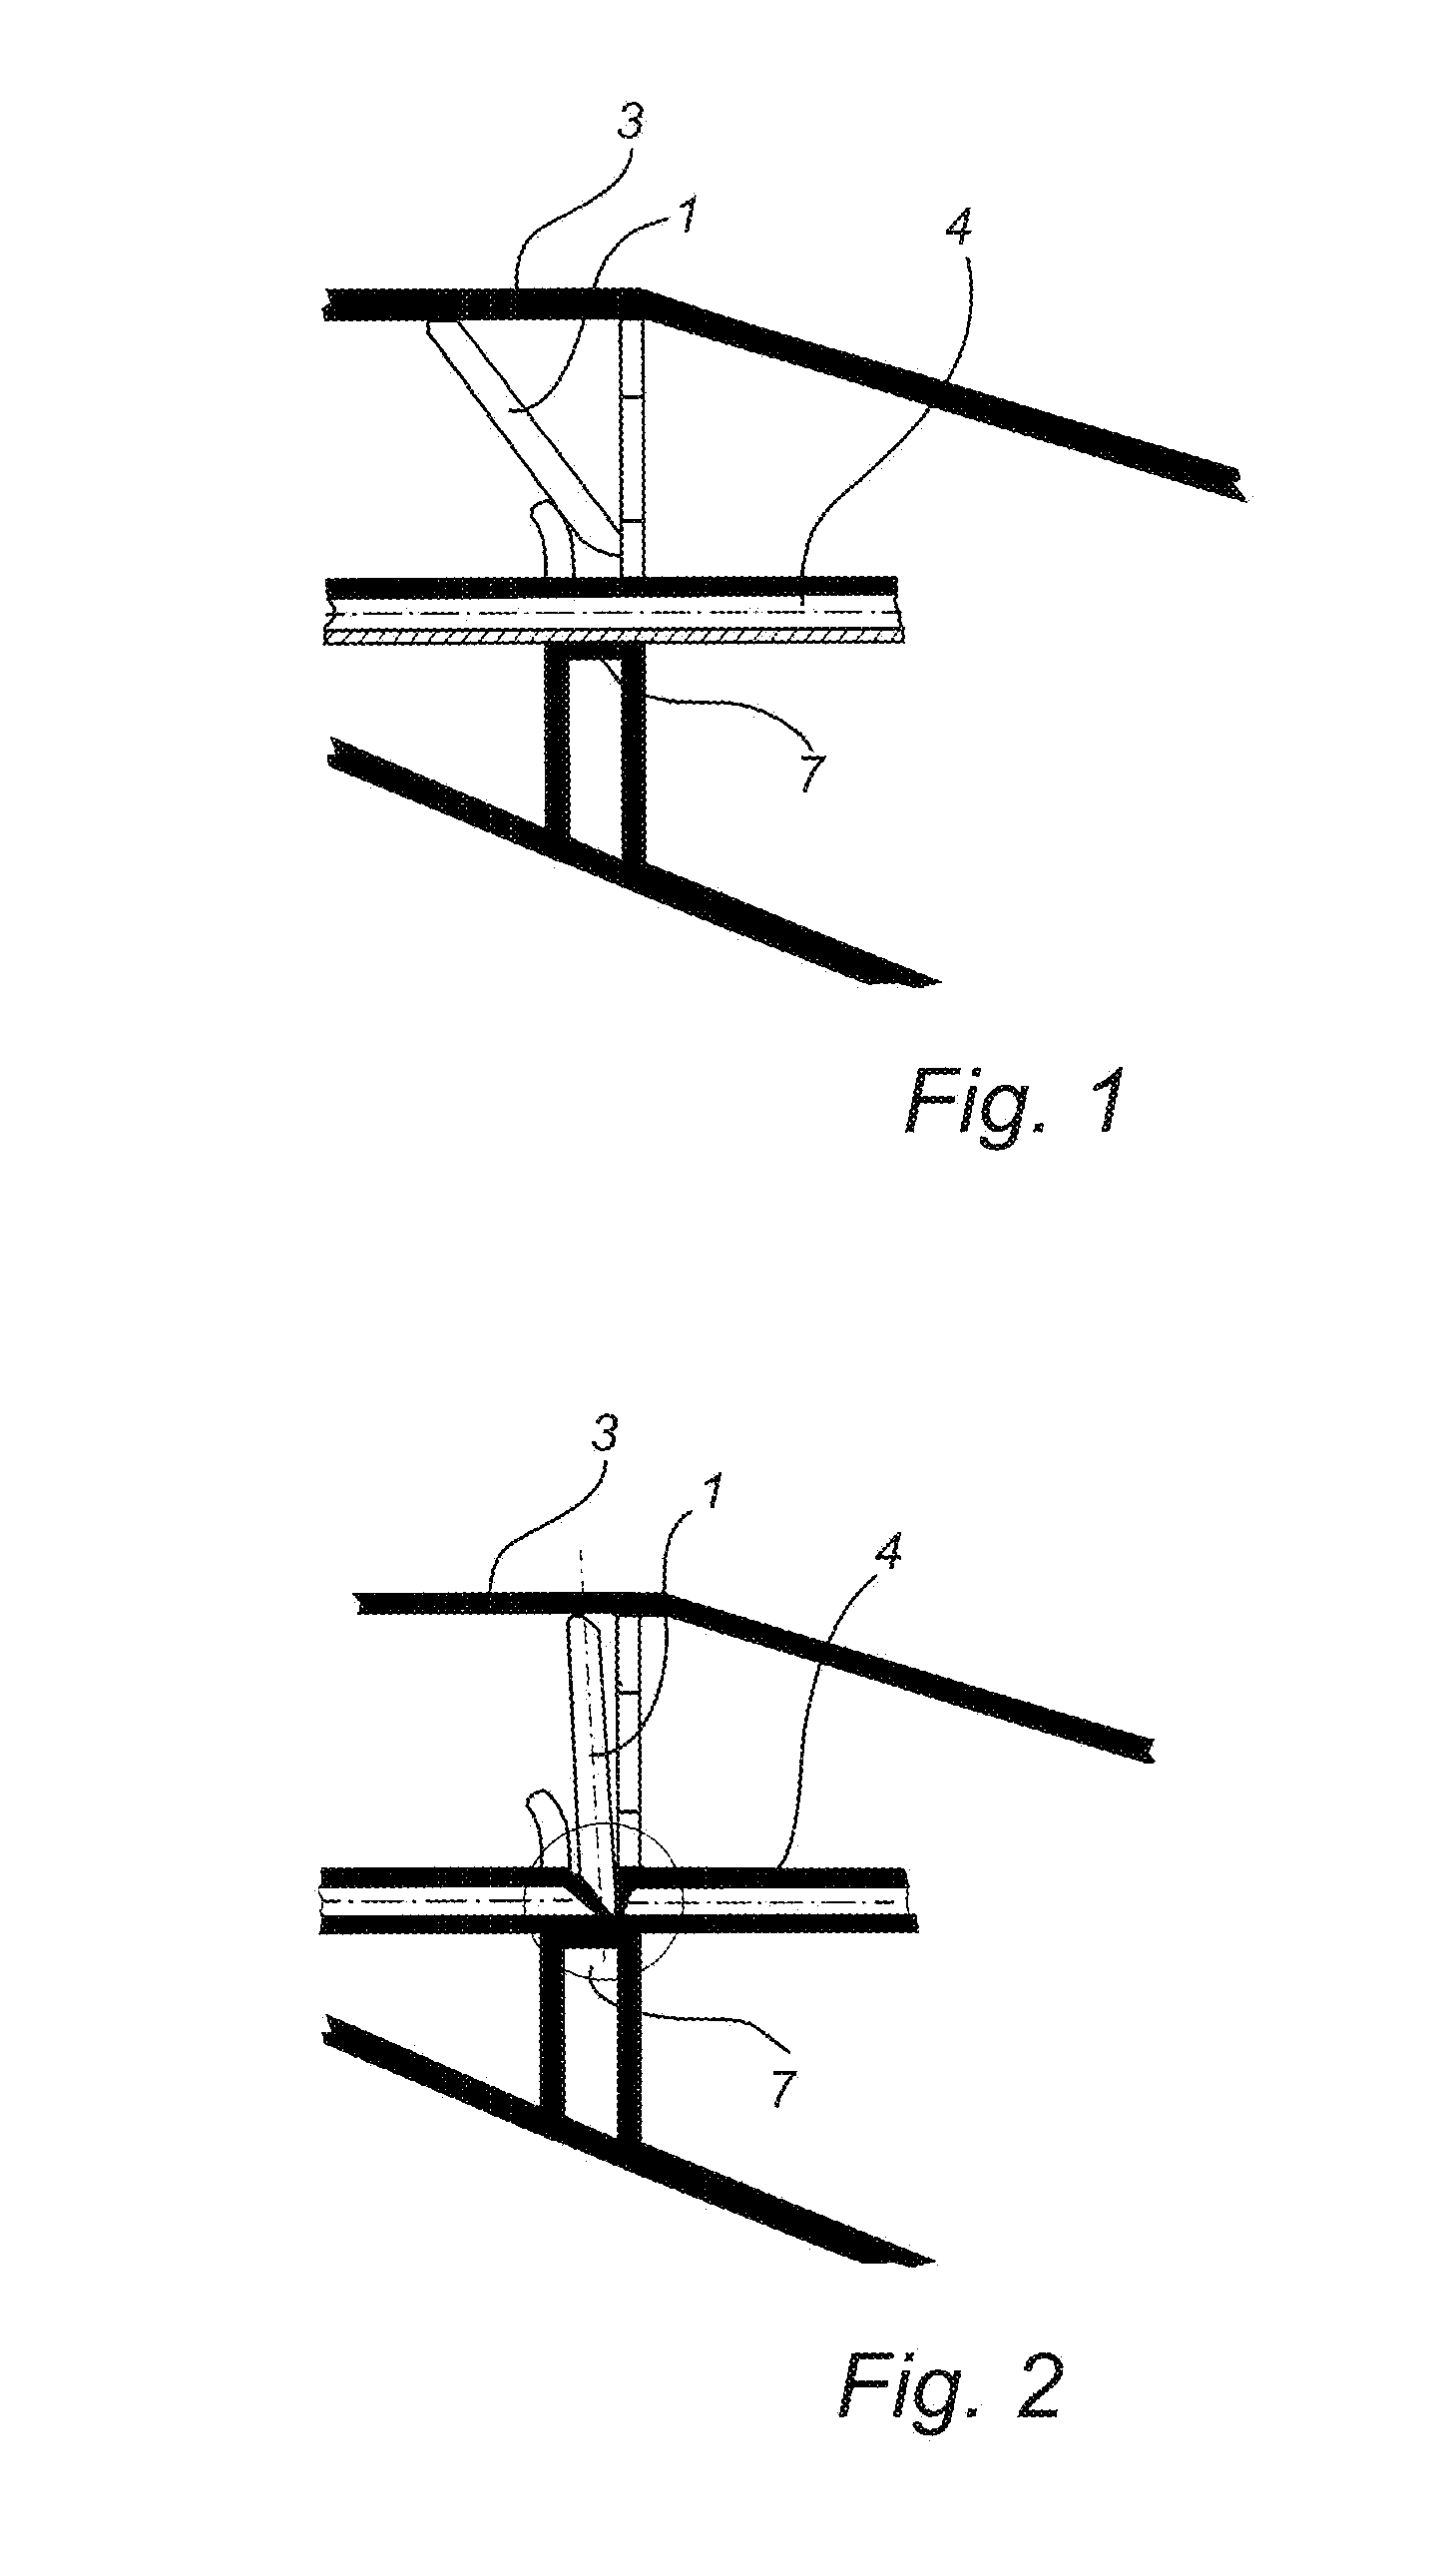 Apparatus including a conduit claimping device